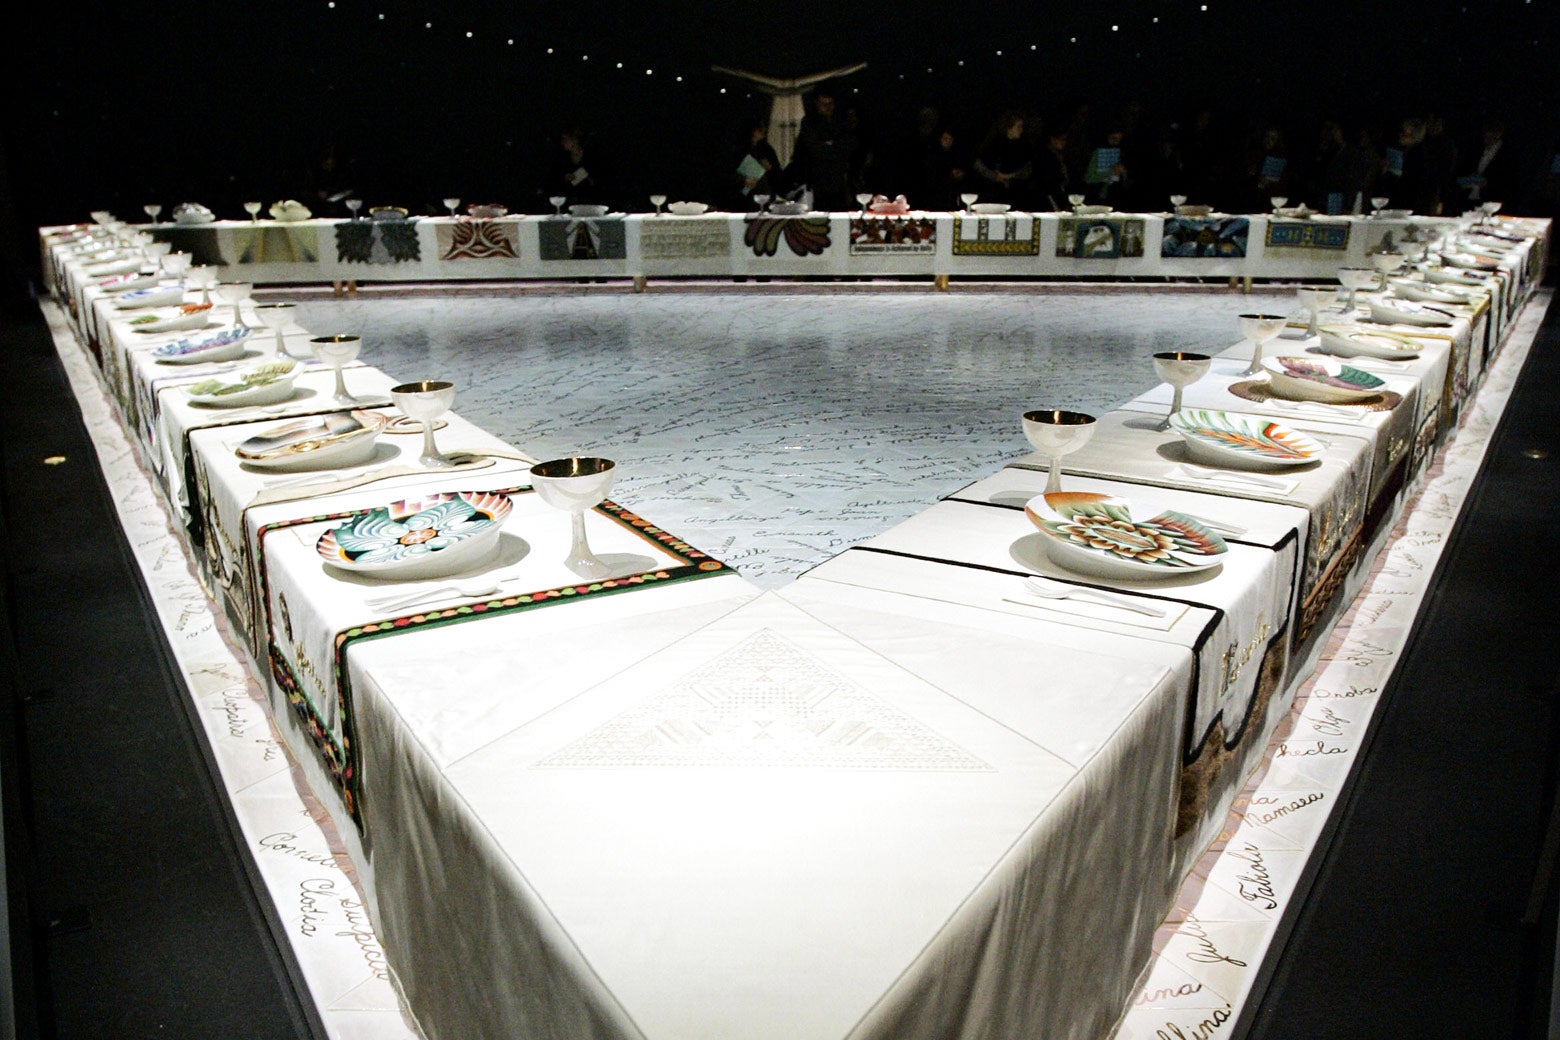 Judy Chicago's The Dinner Party consists of a triangular table set with symbols of female figures throughout history and mythology.